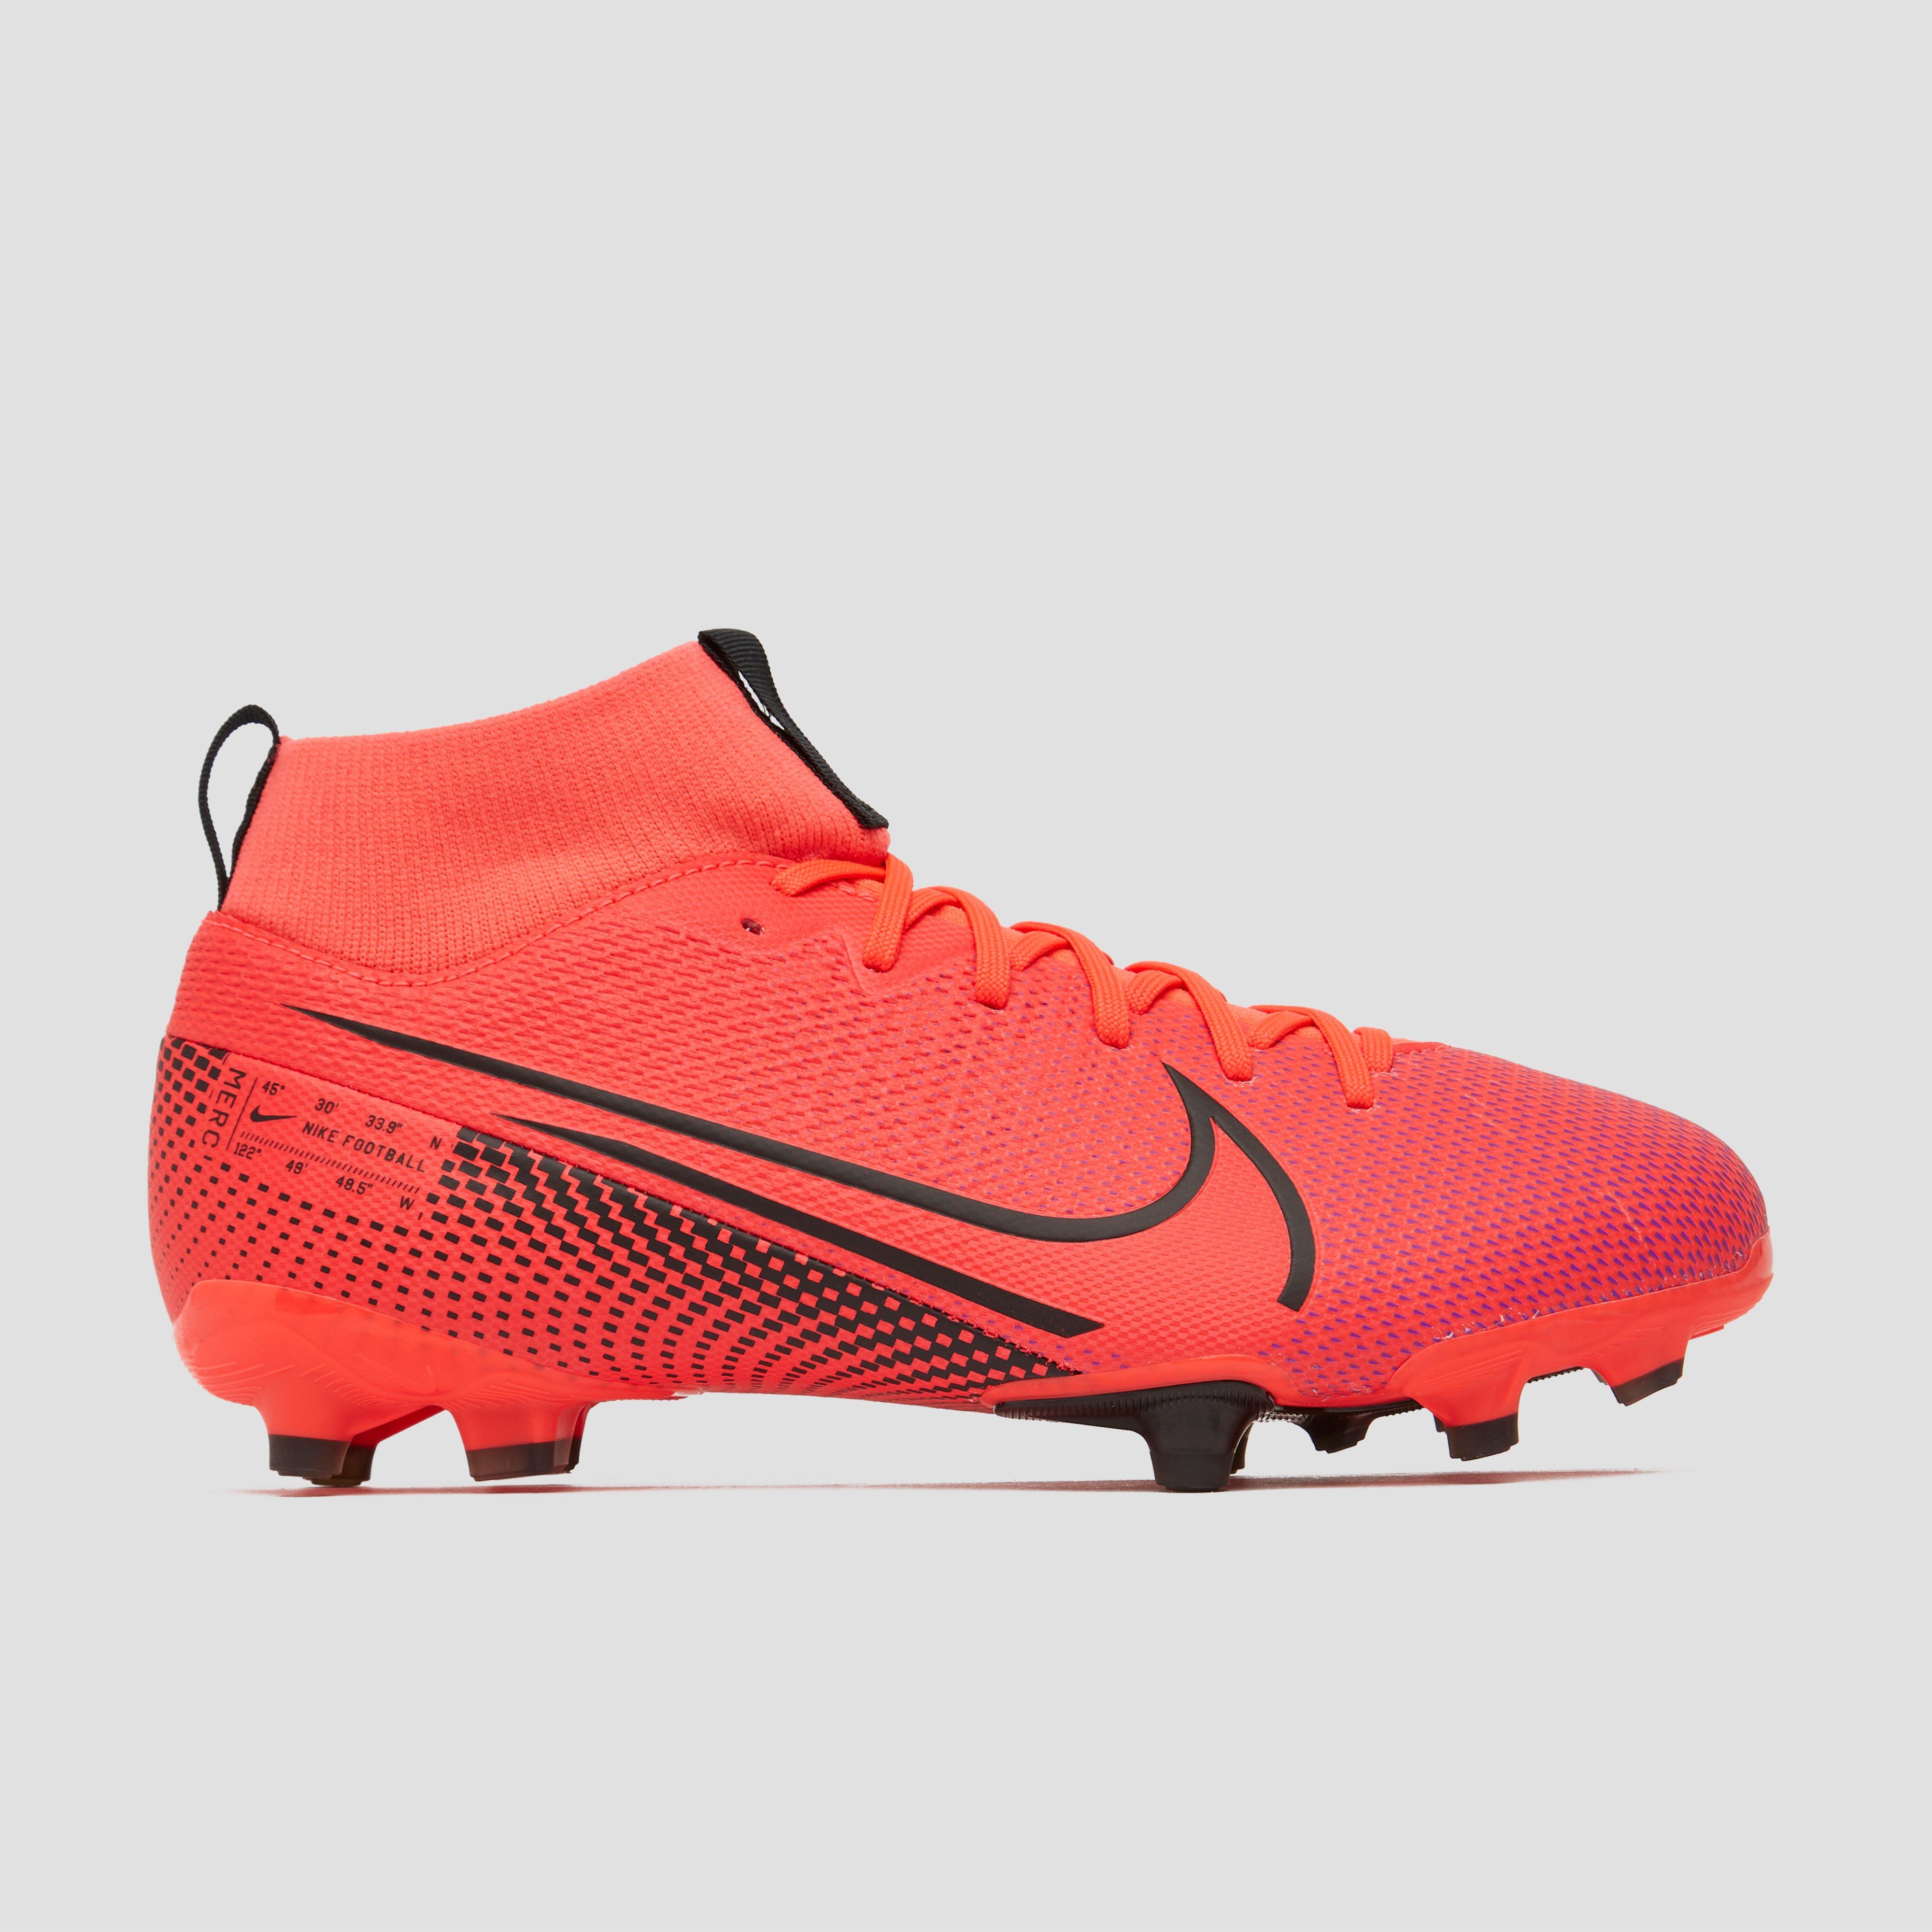 NIKE MERCURIAL JR SUPERFLY 7 ACADEMY BOOTS.